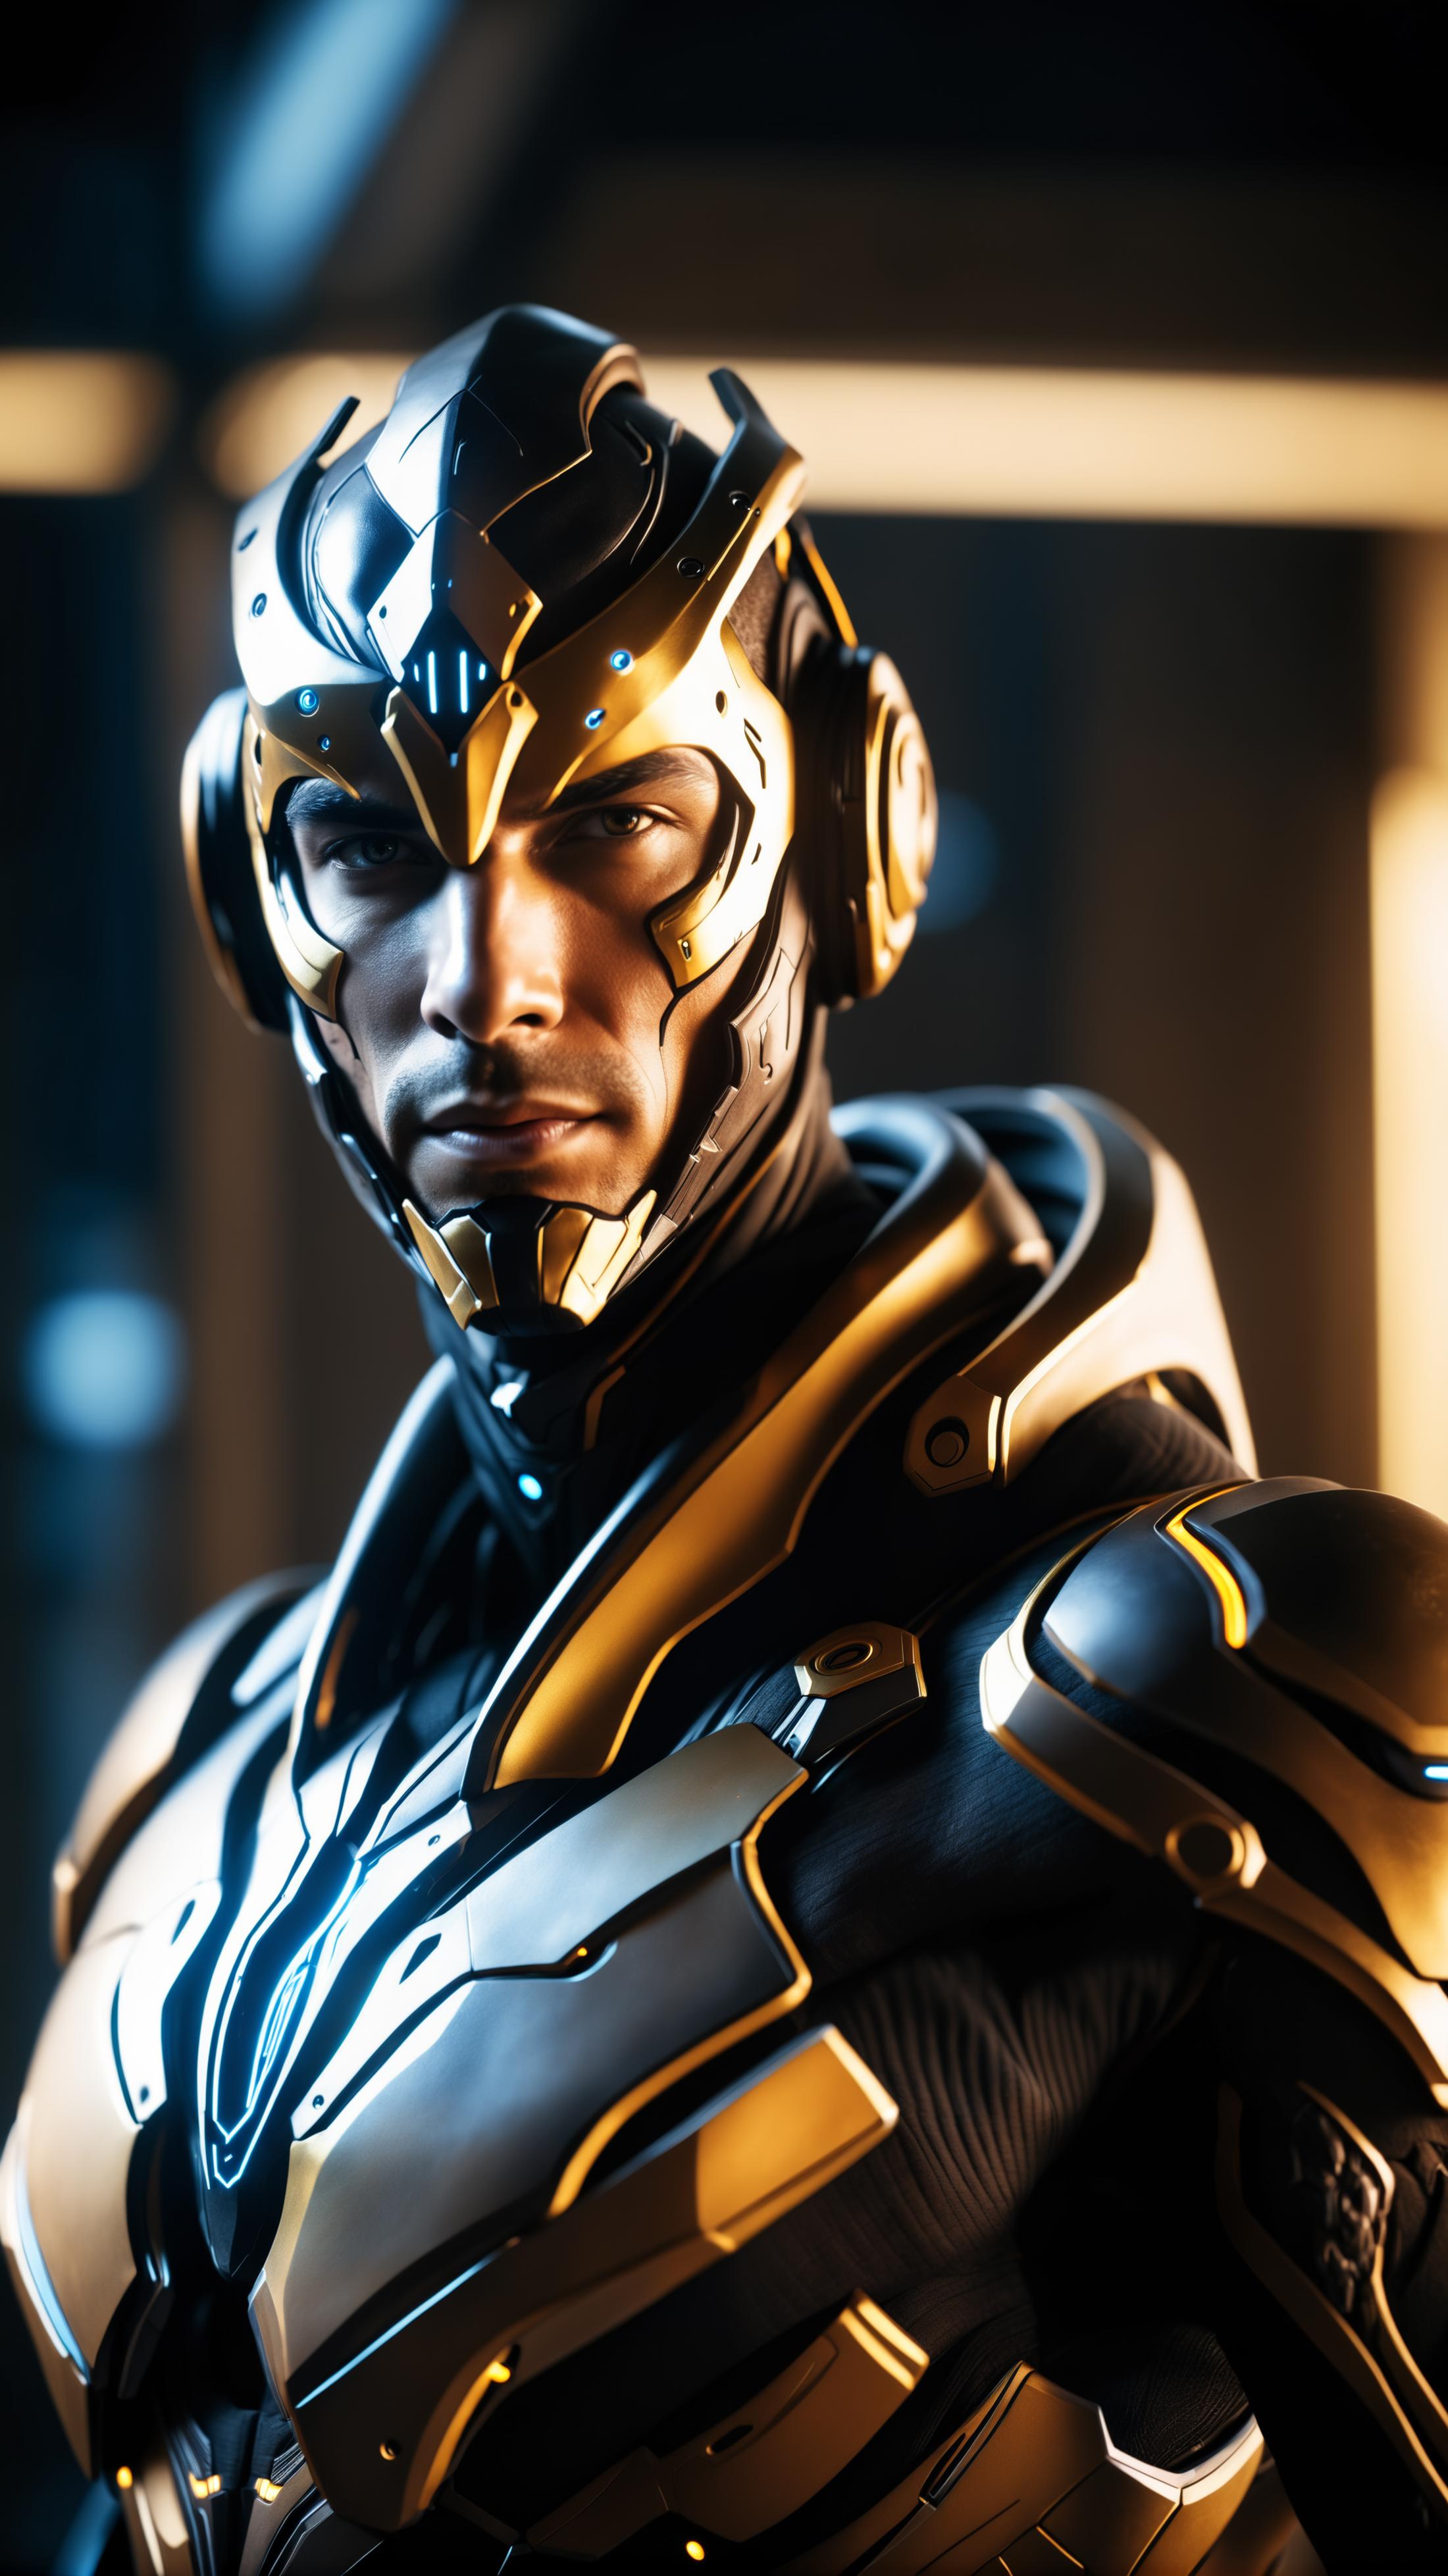 A close-up of a man wearing a metallic armor with gold and black accents.